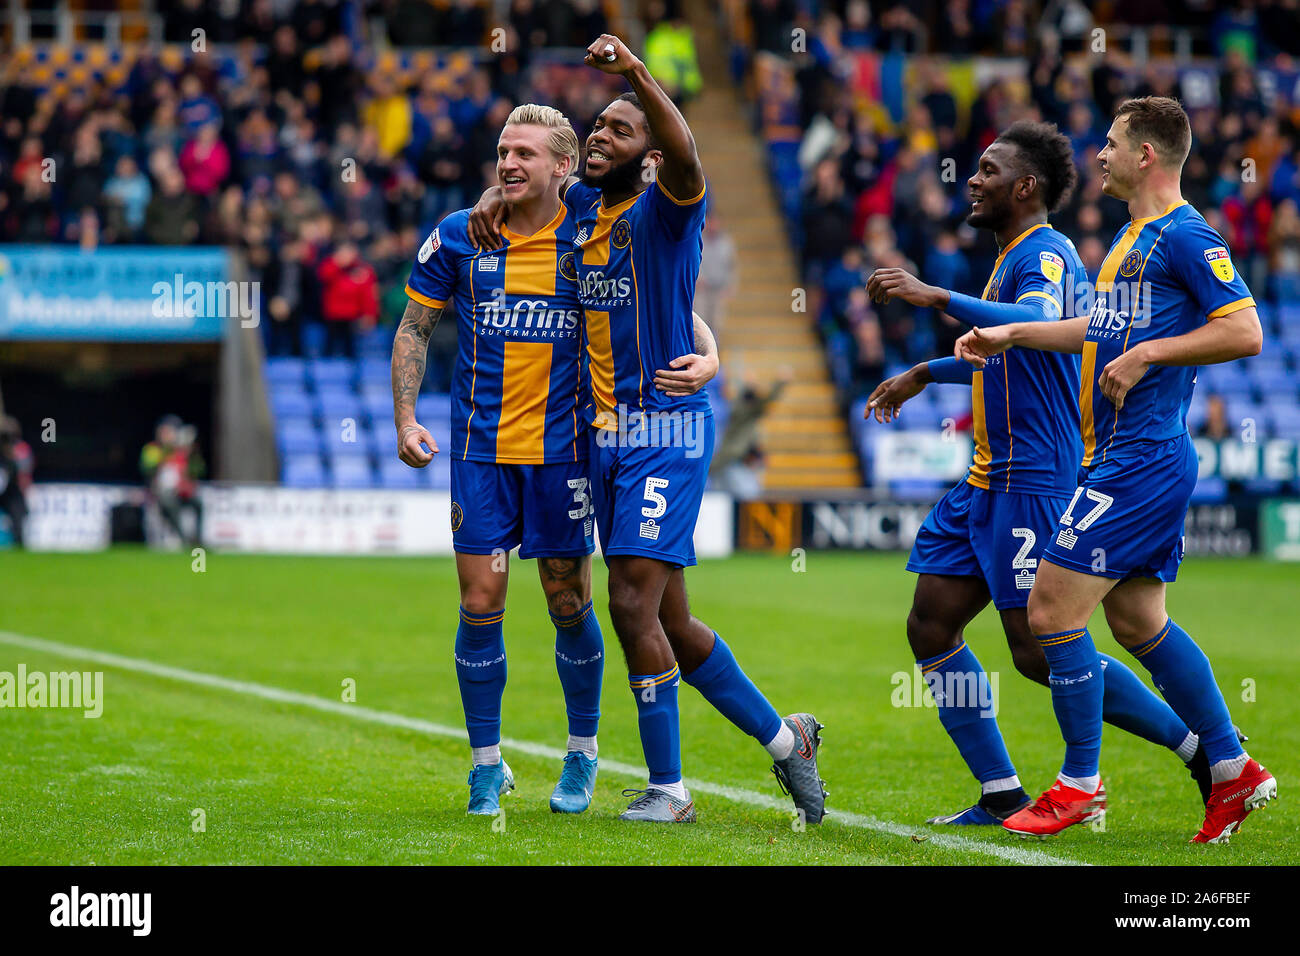 SHREWSBURY, ENGLAND OCTOBER 26TH Jason Cummings of Shrewsbury Town celebrates with Ro-Shaun Williams, Aaron Pierre and Donald Love after scoring the opening goal during the Shrewsbury Town and Sunderland at Montgomery Meadow, Shrewsbury on Saturday 26th October 2019. (Credit: Alan Hayward | MI News) Photograph may only be used for newspaper and/or magazine editorial purposes, license required for commercial use Credit: MI News & Sport /Alamy Live News Credit: MI News & Sport /Alamy Live News Stock Photo